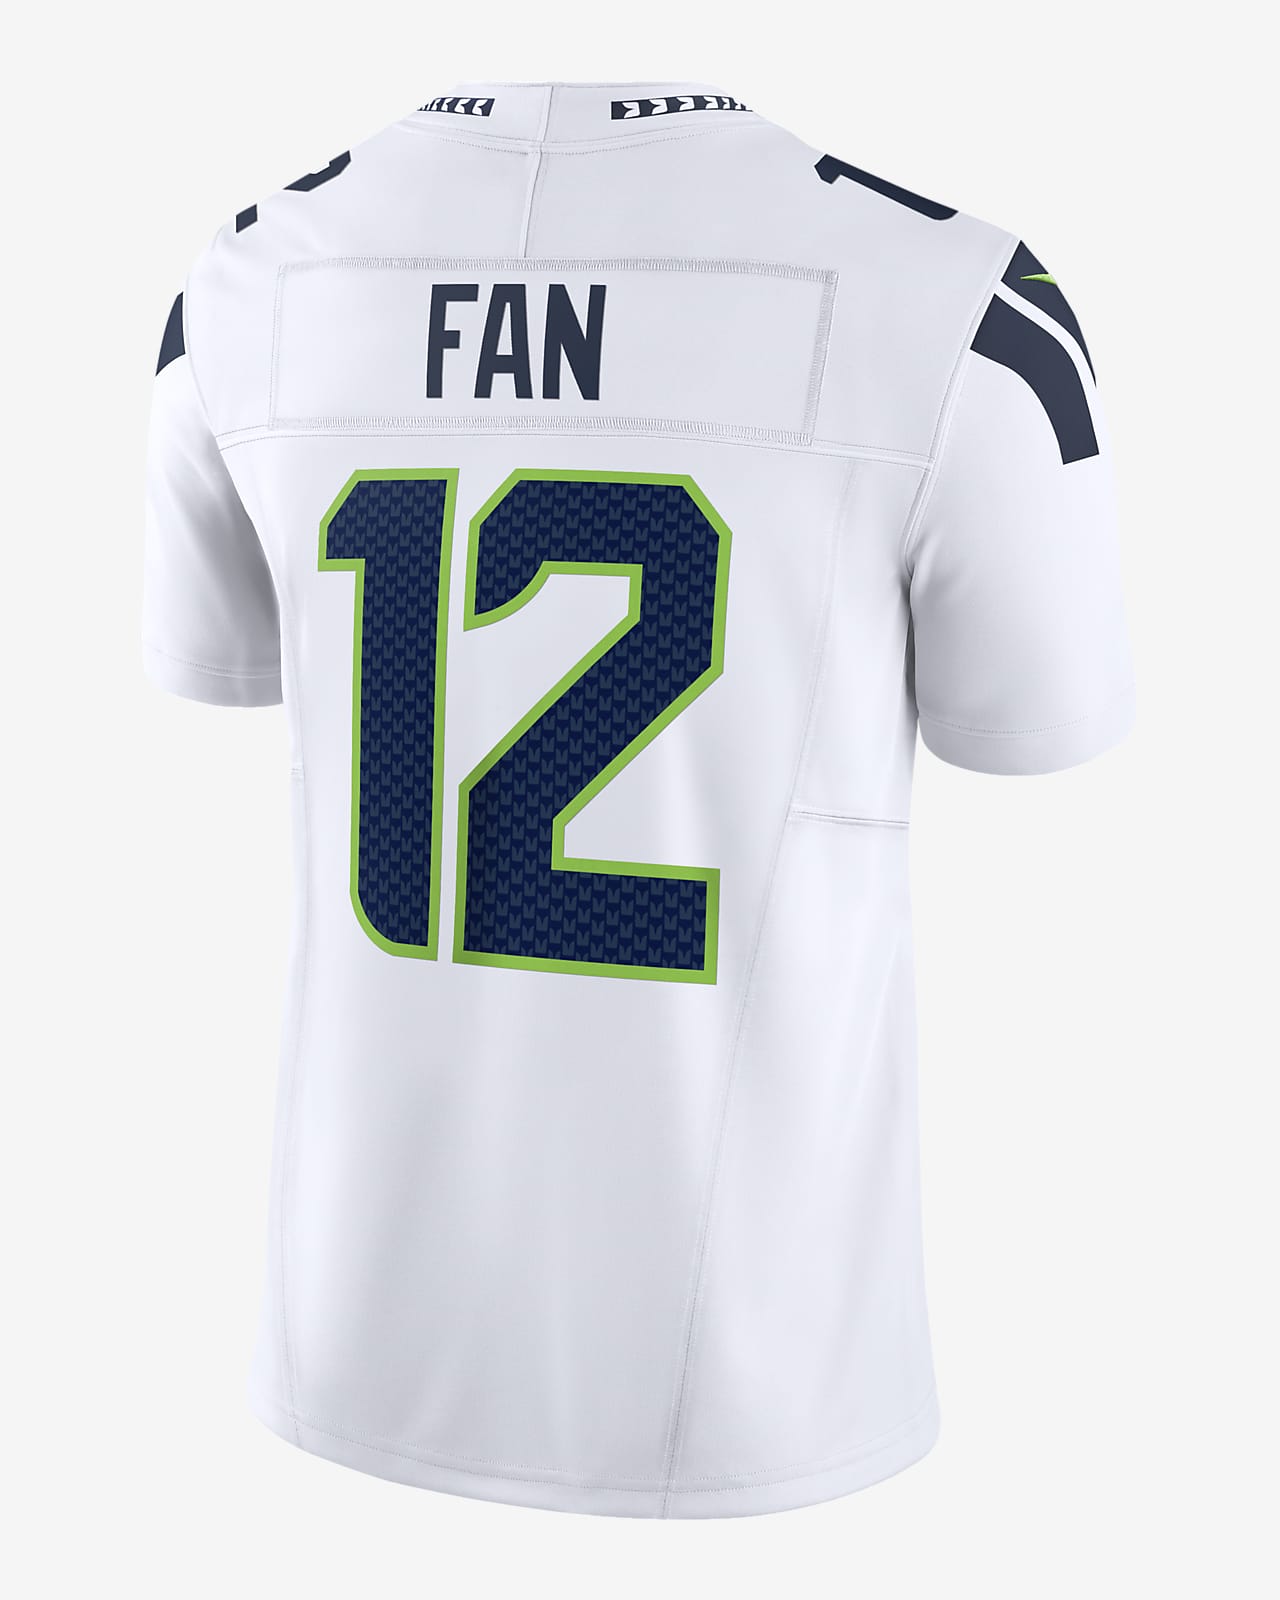 Seahawks aside, Nike unveiling reveals only small changes to most NFL  uniforms - ESPN